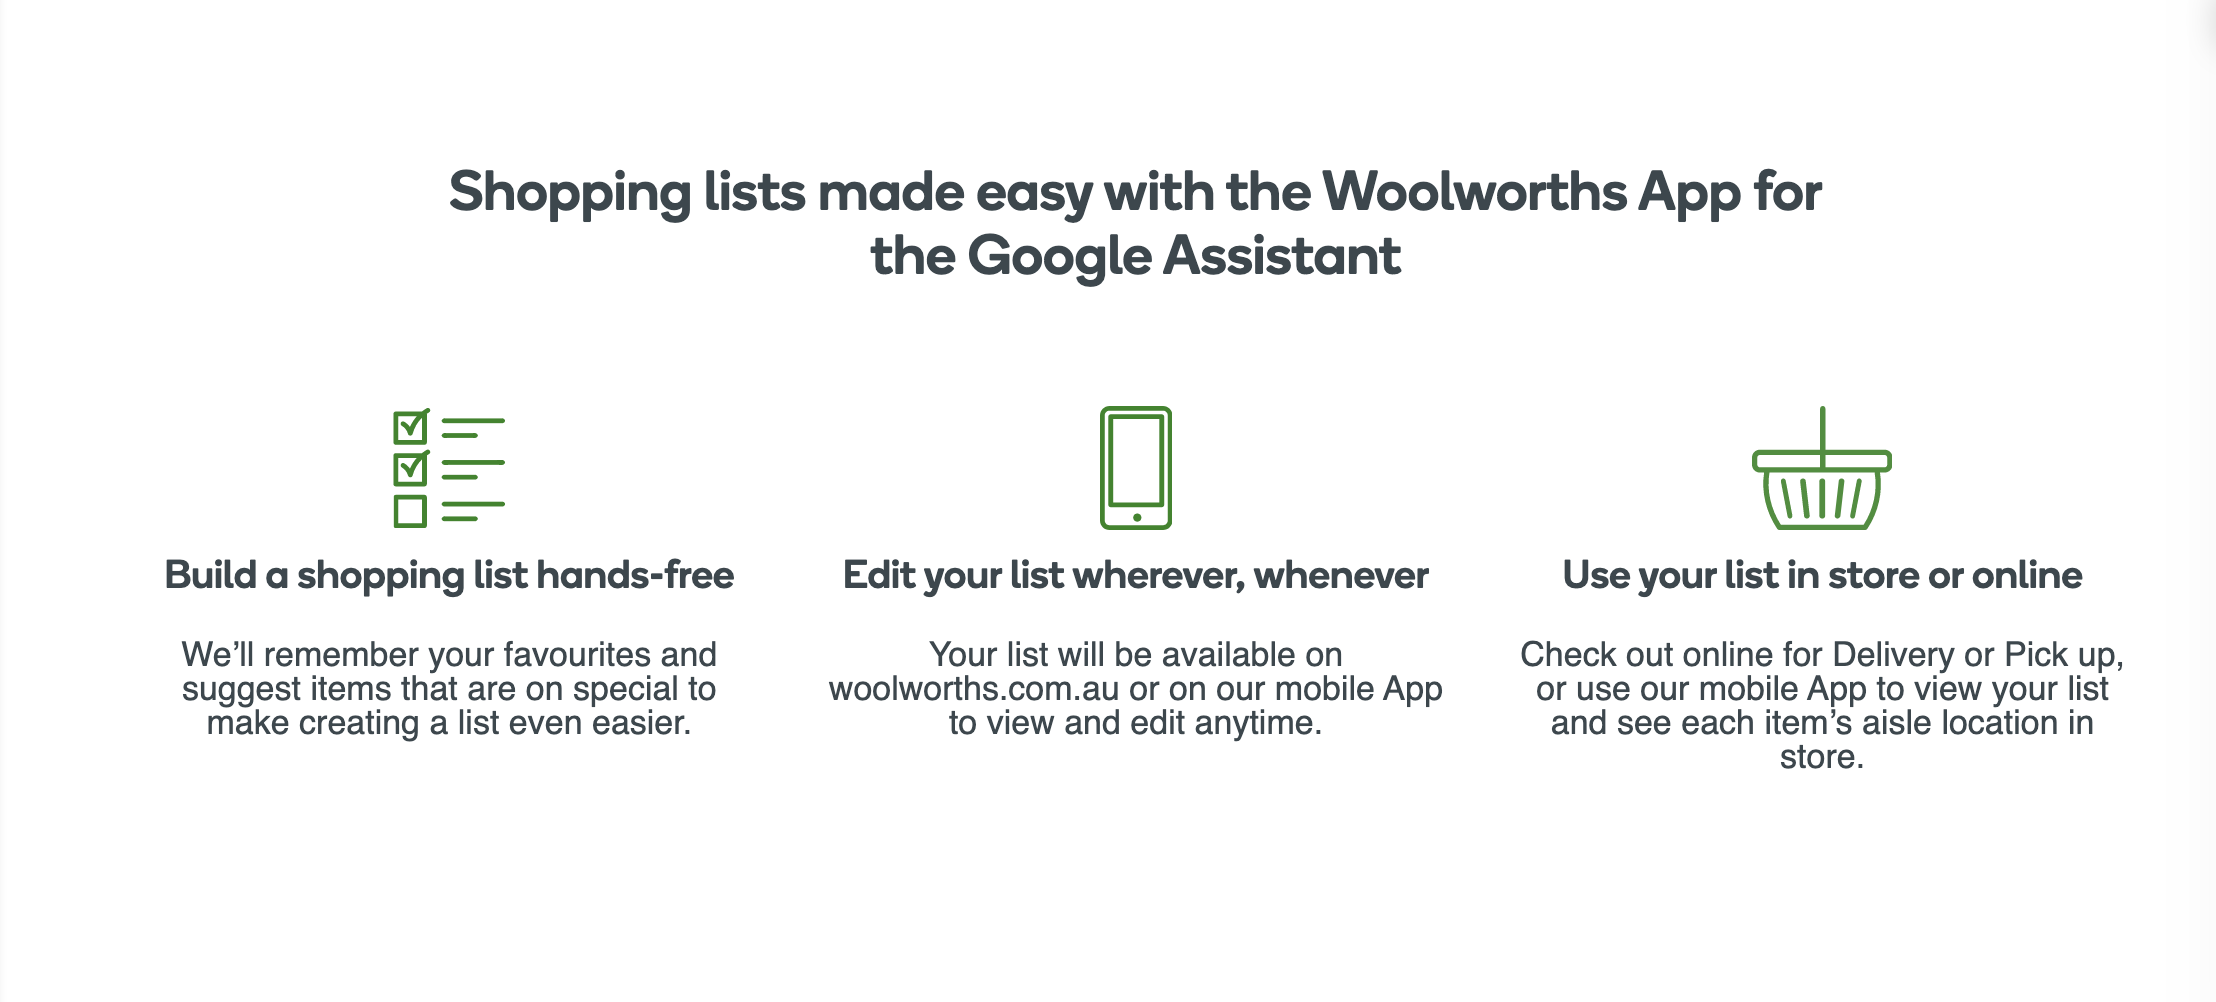 Woolworths app shopping list for the Google Assistant